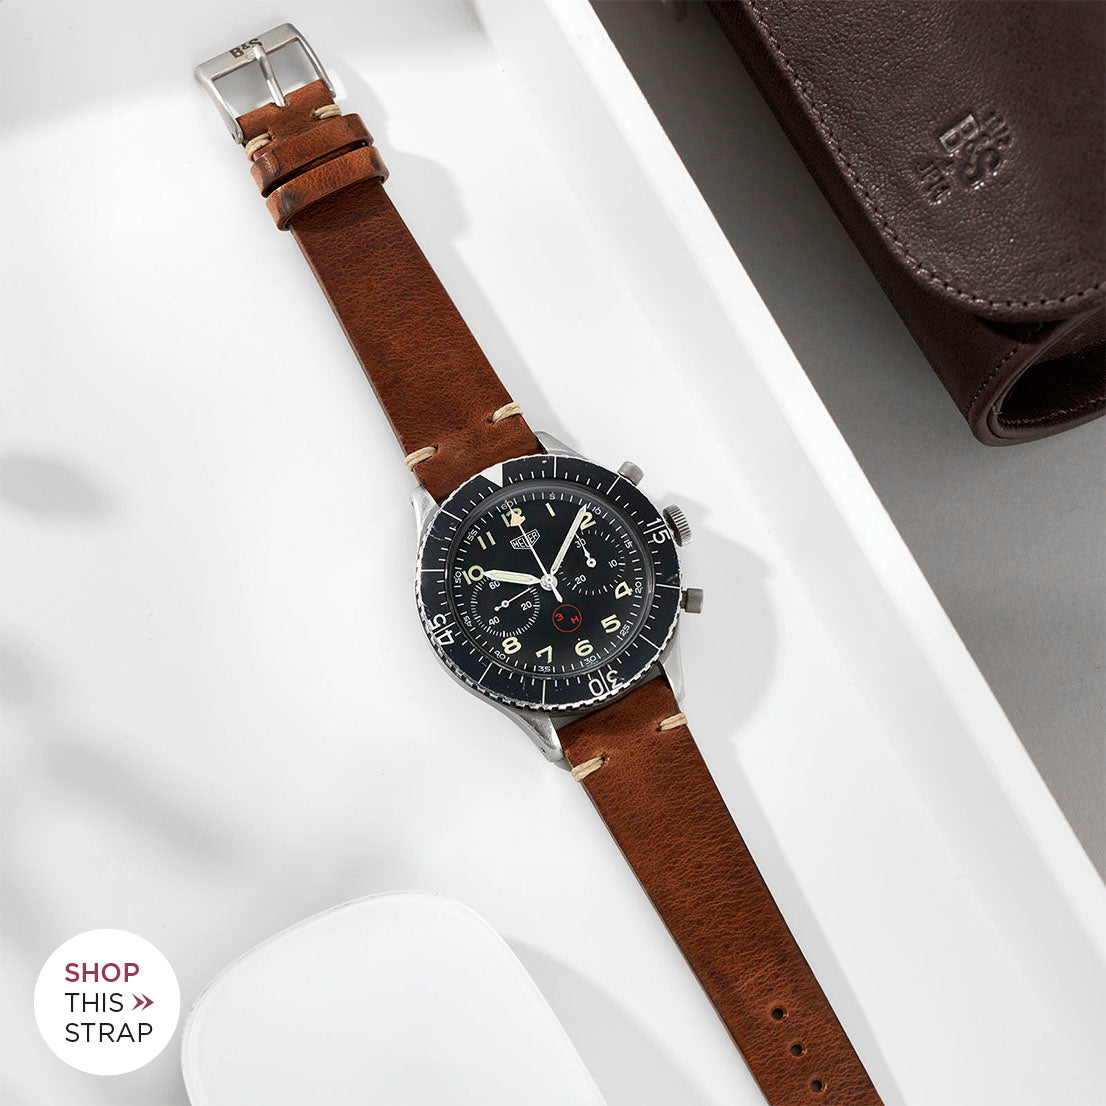 Bulang and Sons_Strap Guide _The Heuer Chronograph 3H German Airforce_Siena Brown Leather Watch Strap